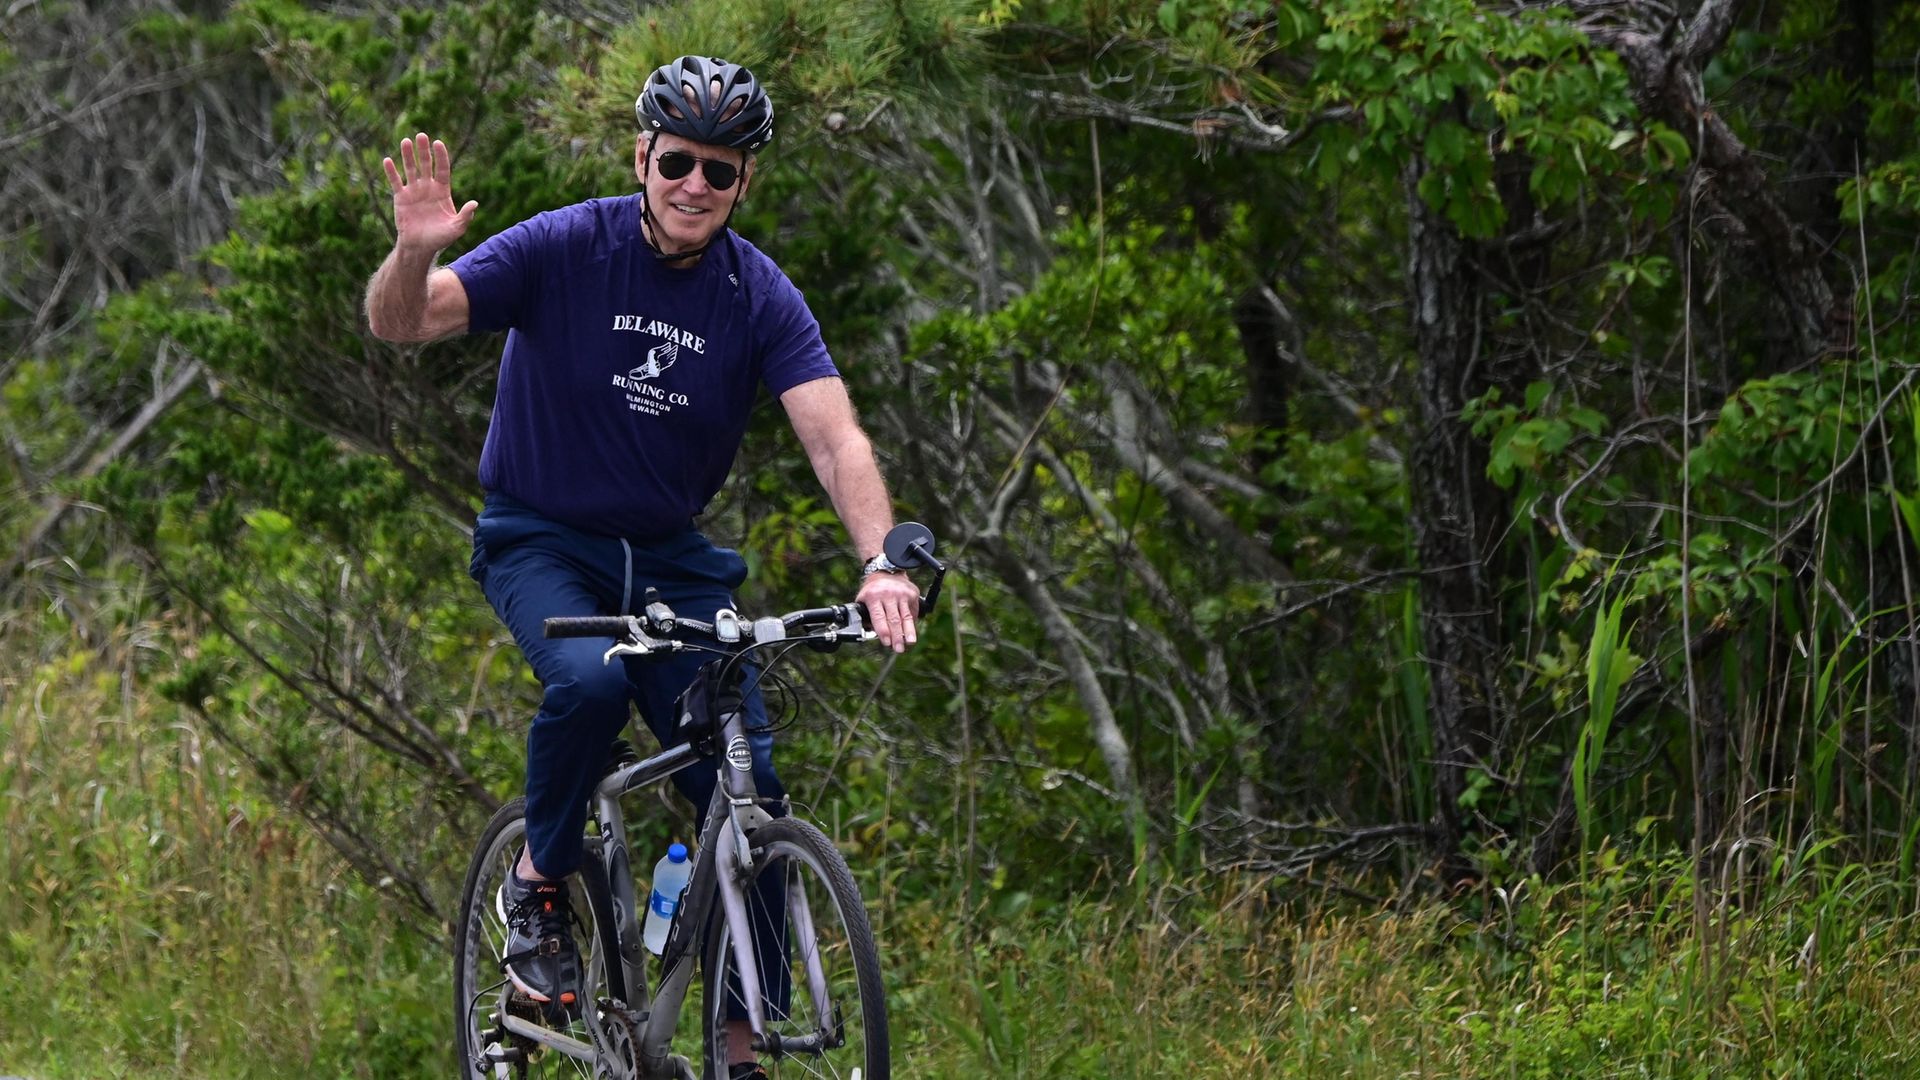 Joe Biden riding his bicycle in Cape Henlopen State Park on June 3, 2021, in Lewes, Delaware - Credit: AFP via Getty Images